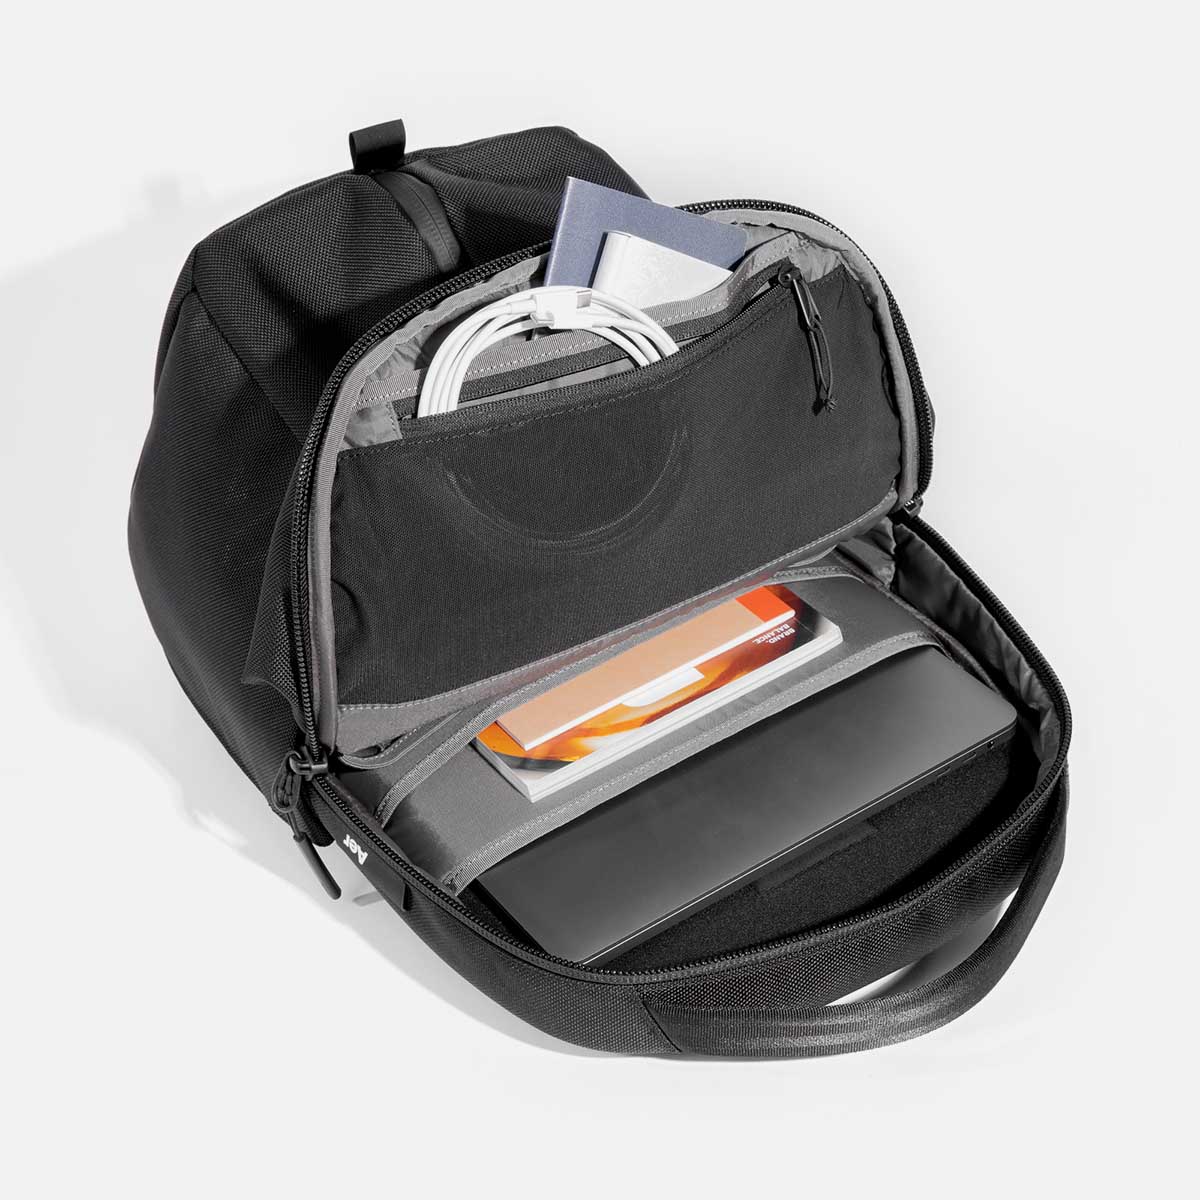 Aer Fit Pack 3 backpack giveaway: A separate compartment protects your work items.